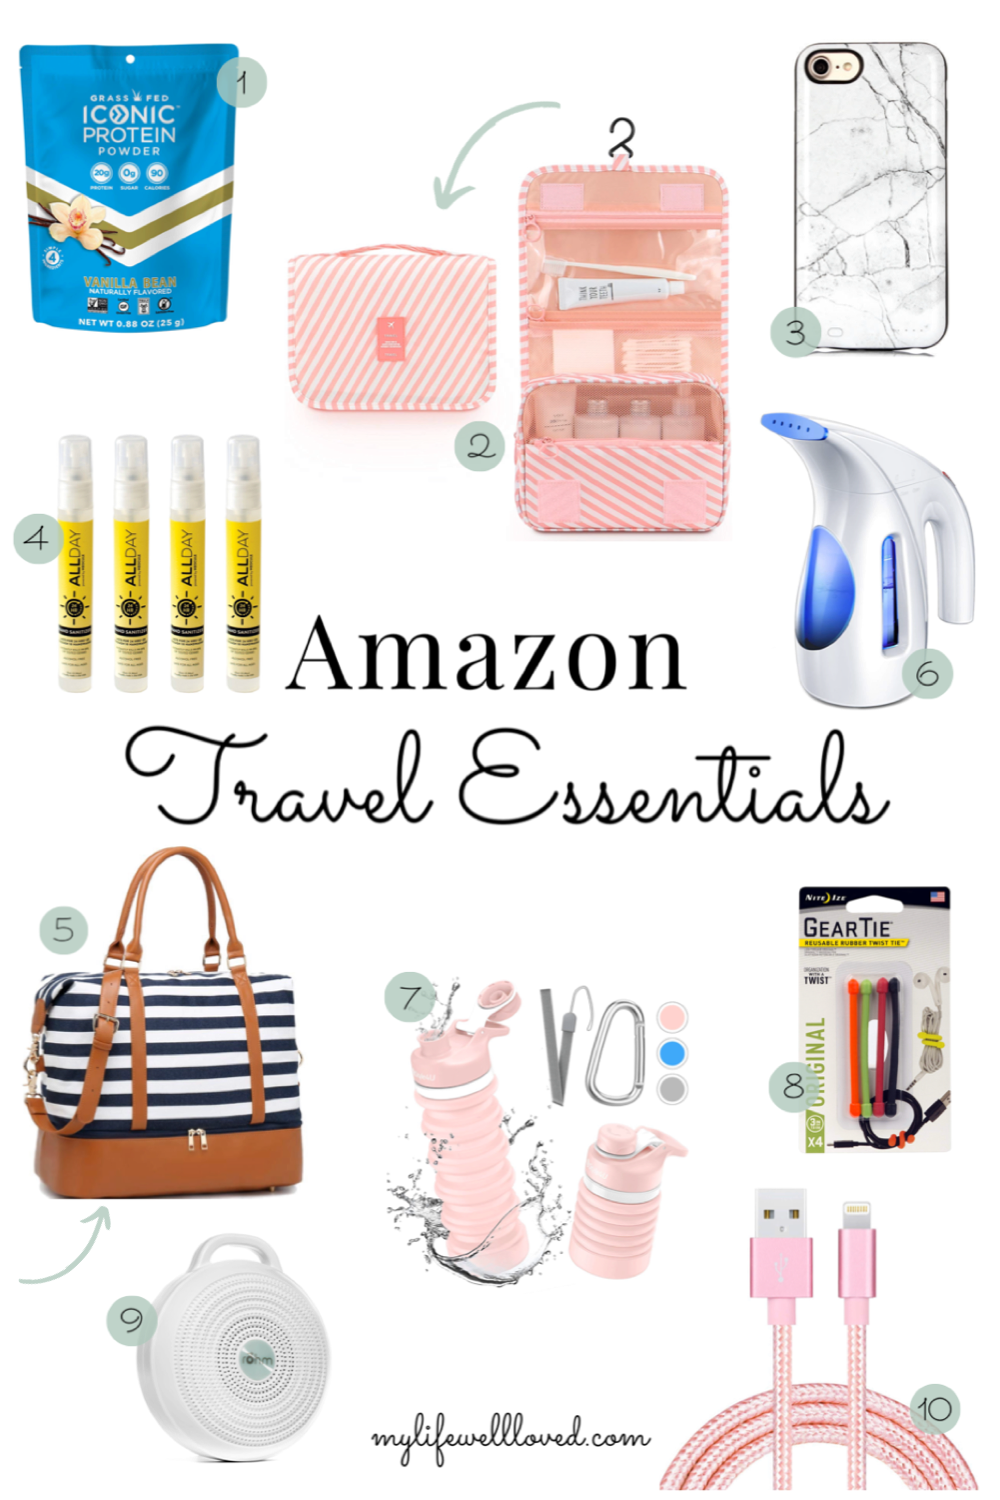 All My Travel Essentials - wit & whimsy